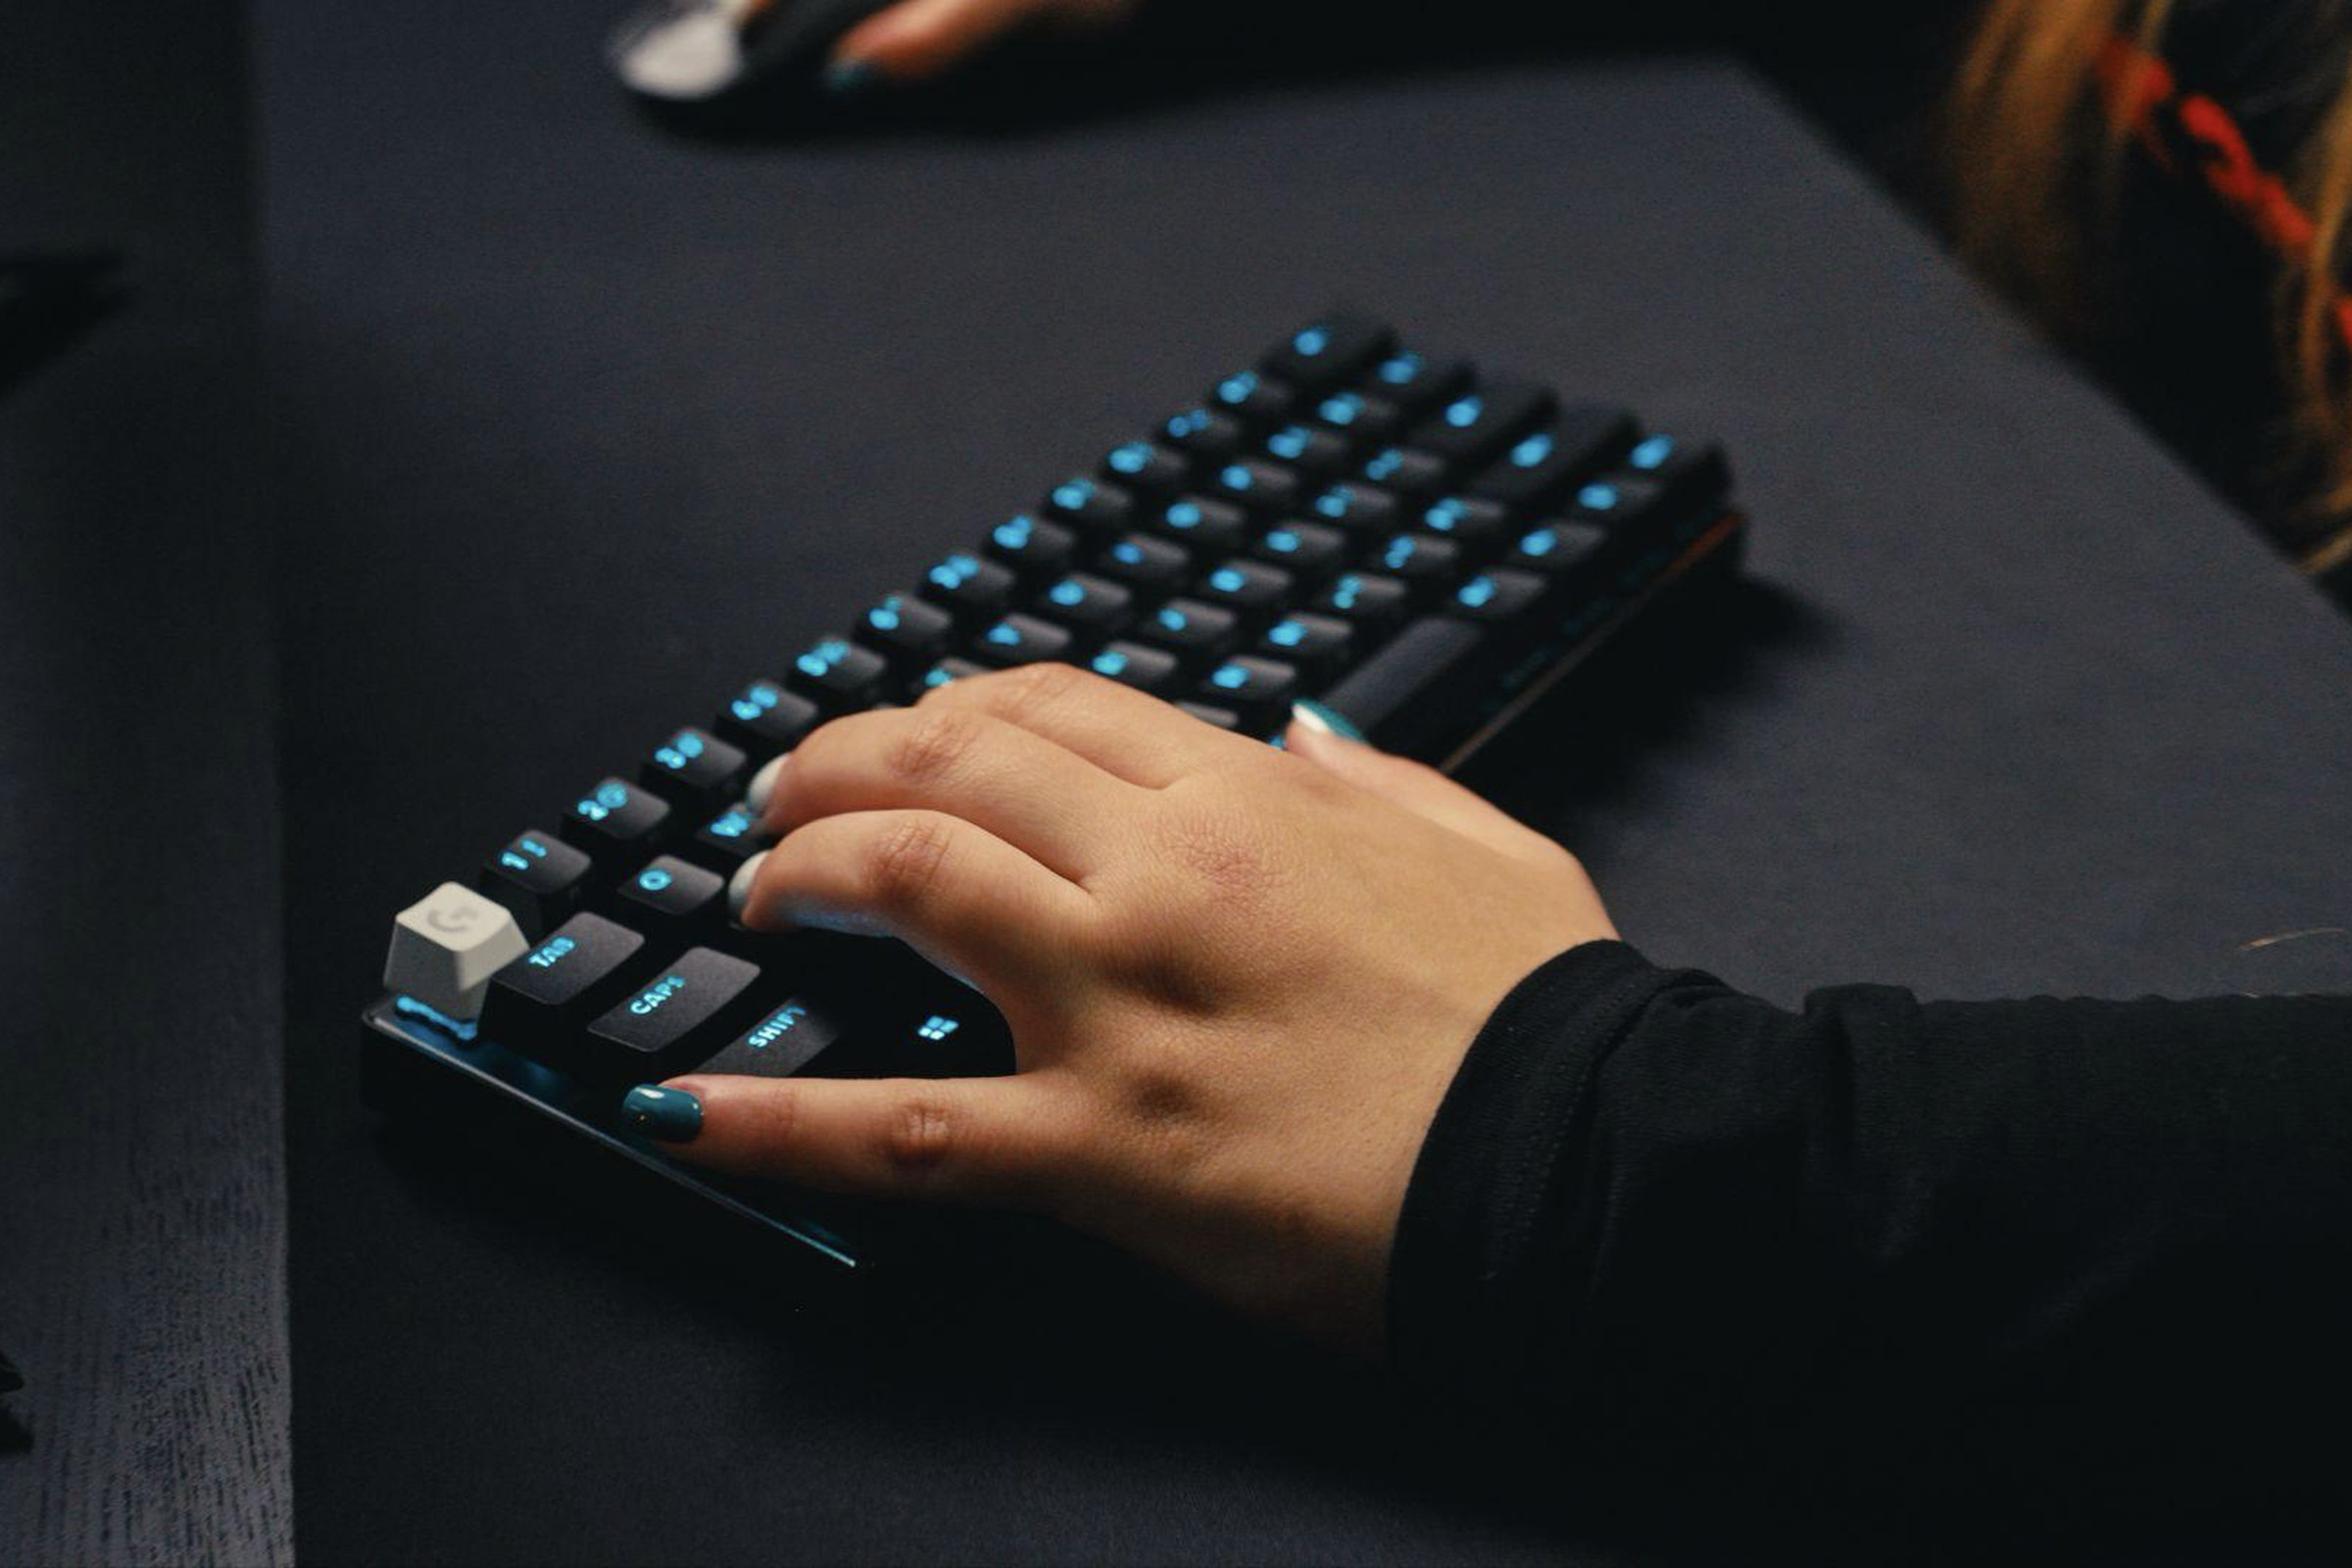 The Logitech G Pro X 60 Lightspeed being used on a desk.